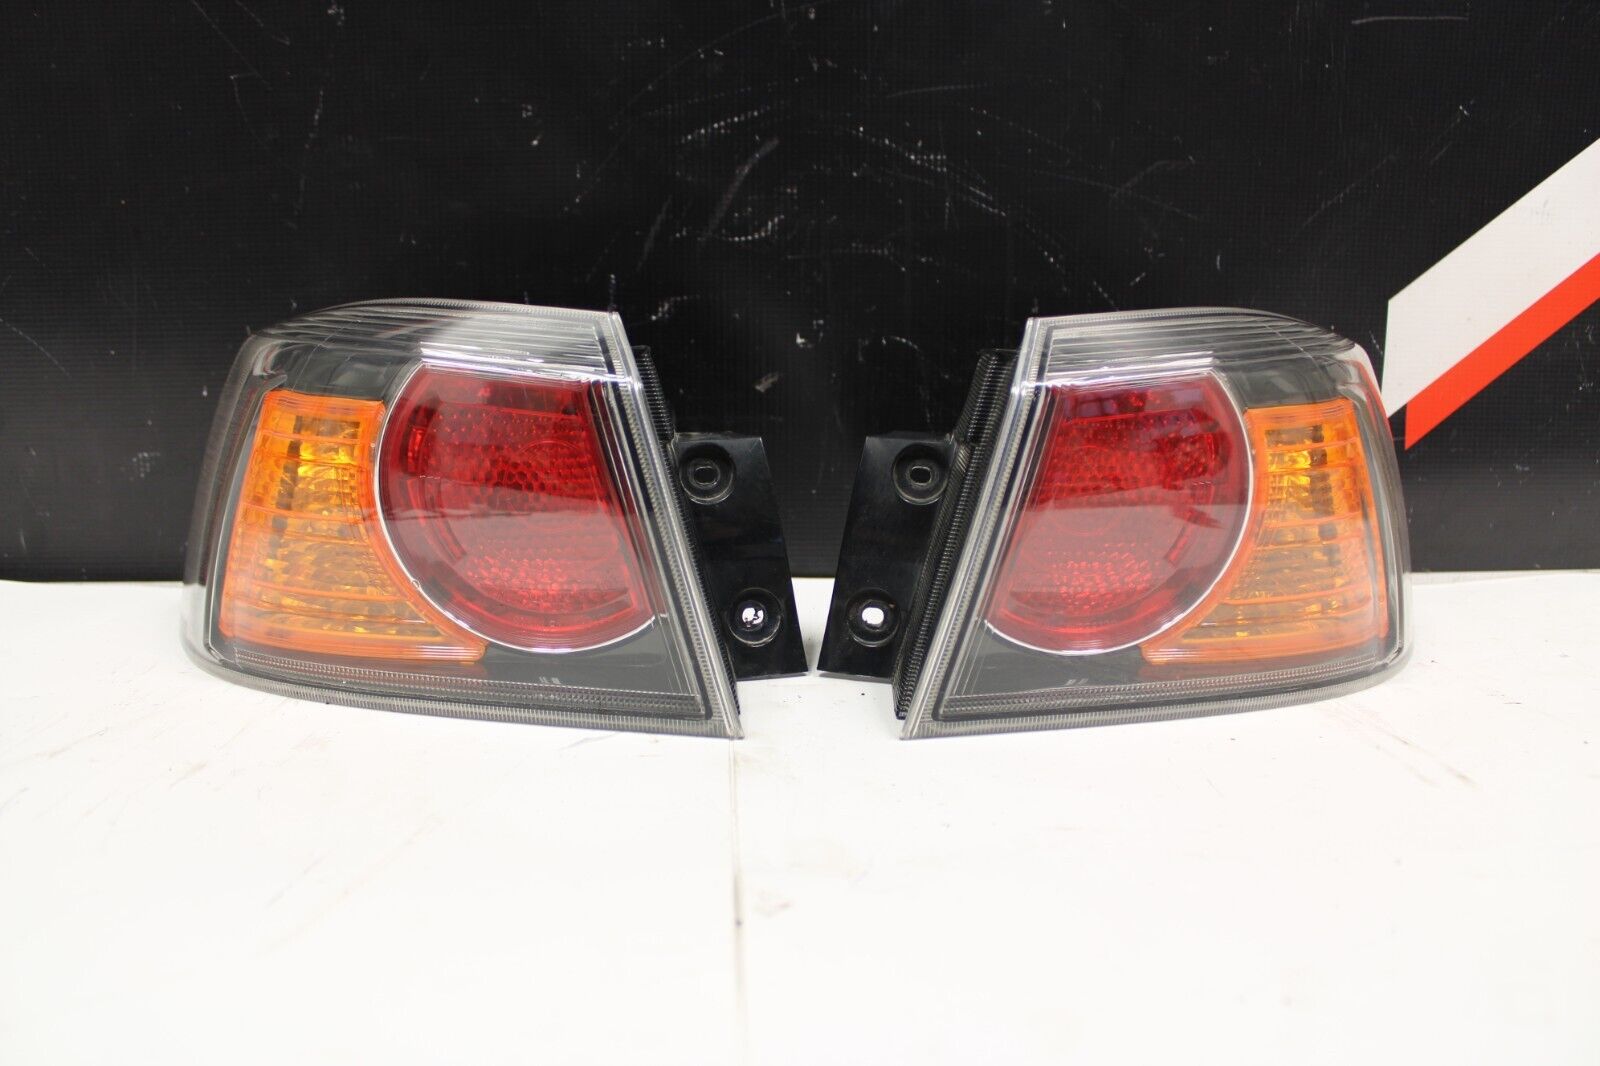 2008-2015 Mitsubishi Lancer Ralliart Rear Outer Tail Light Set TAILLIGHTS OEM